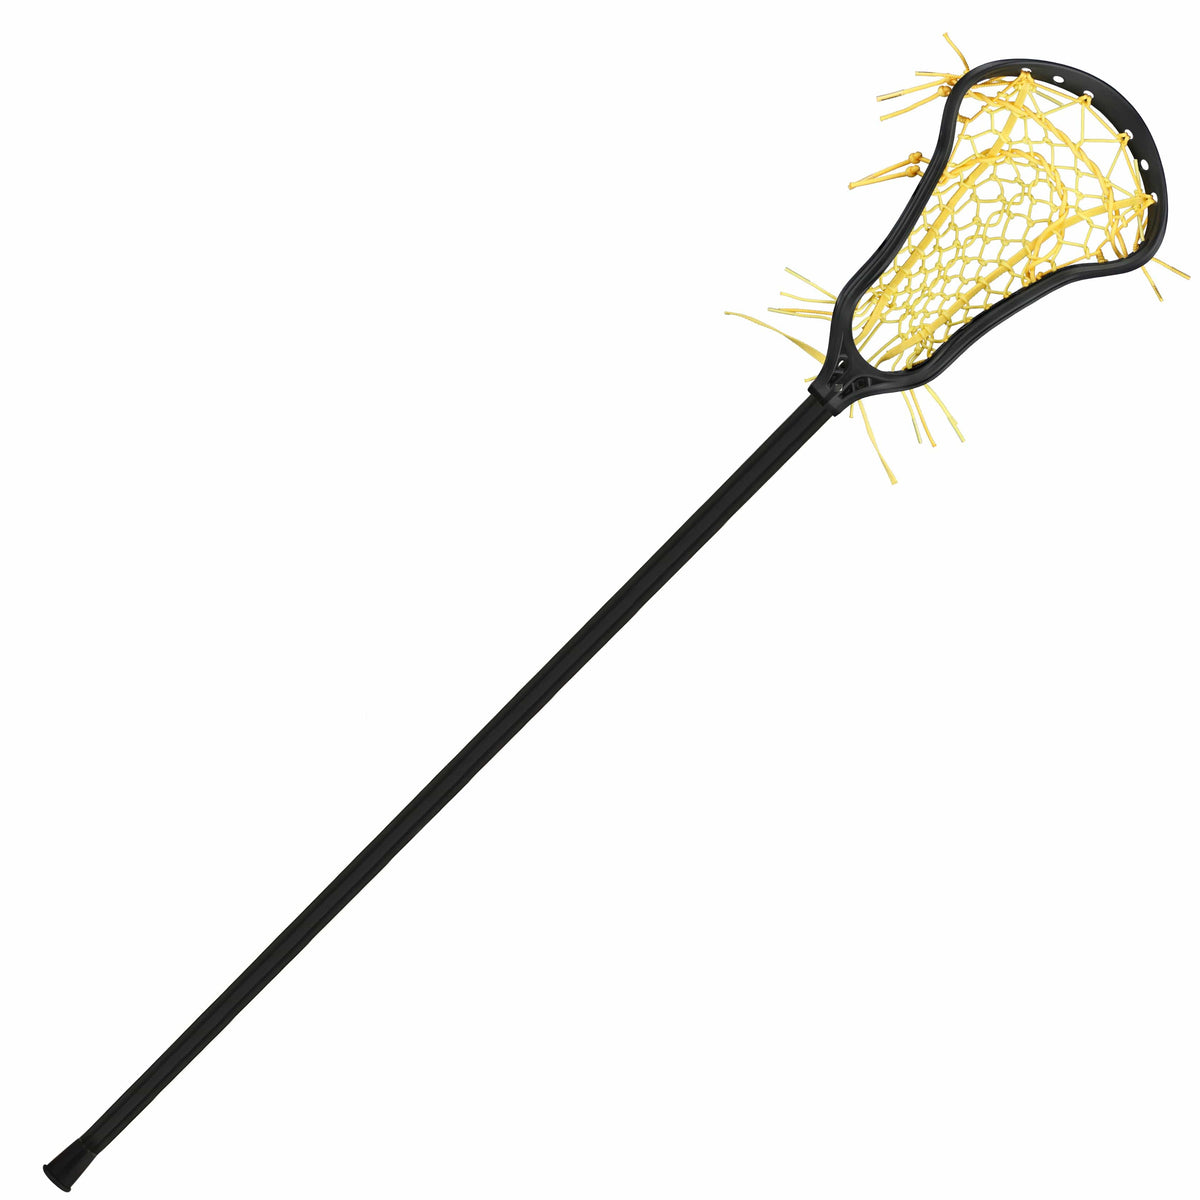 StringKing Womens Complete Sticks Black/Yellow StringKing Womens Complete 2 Pro Offense Lacrosse Stick with Tech Trad and Metal 3 Pro Shaft from Lacrosse Fanatic